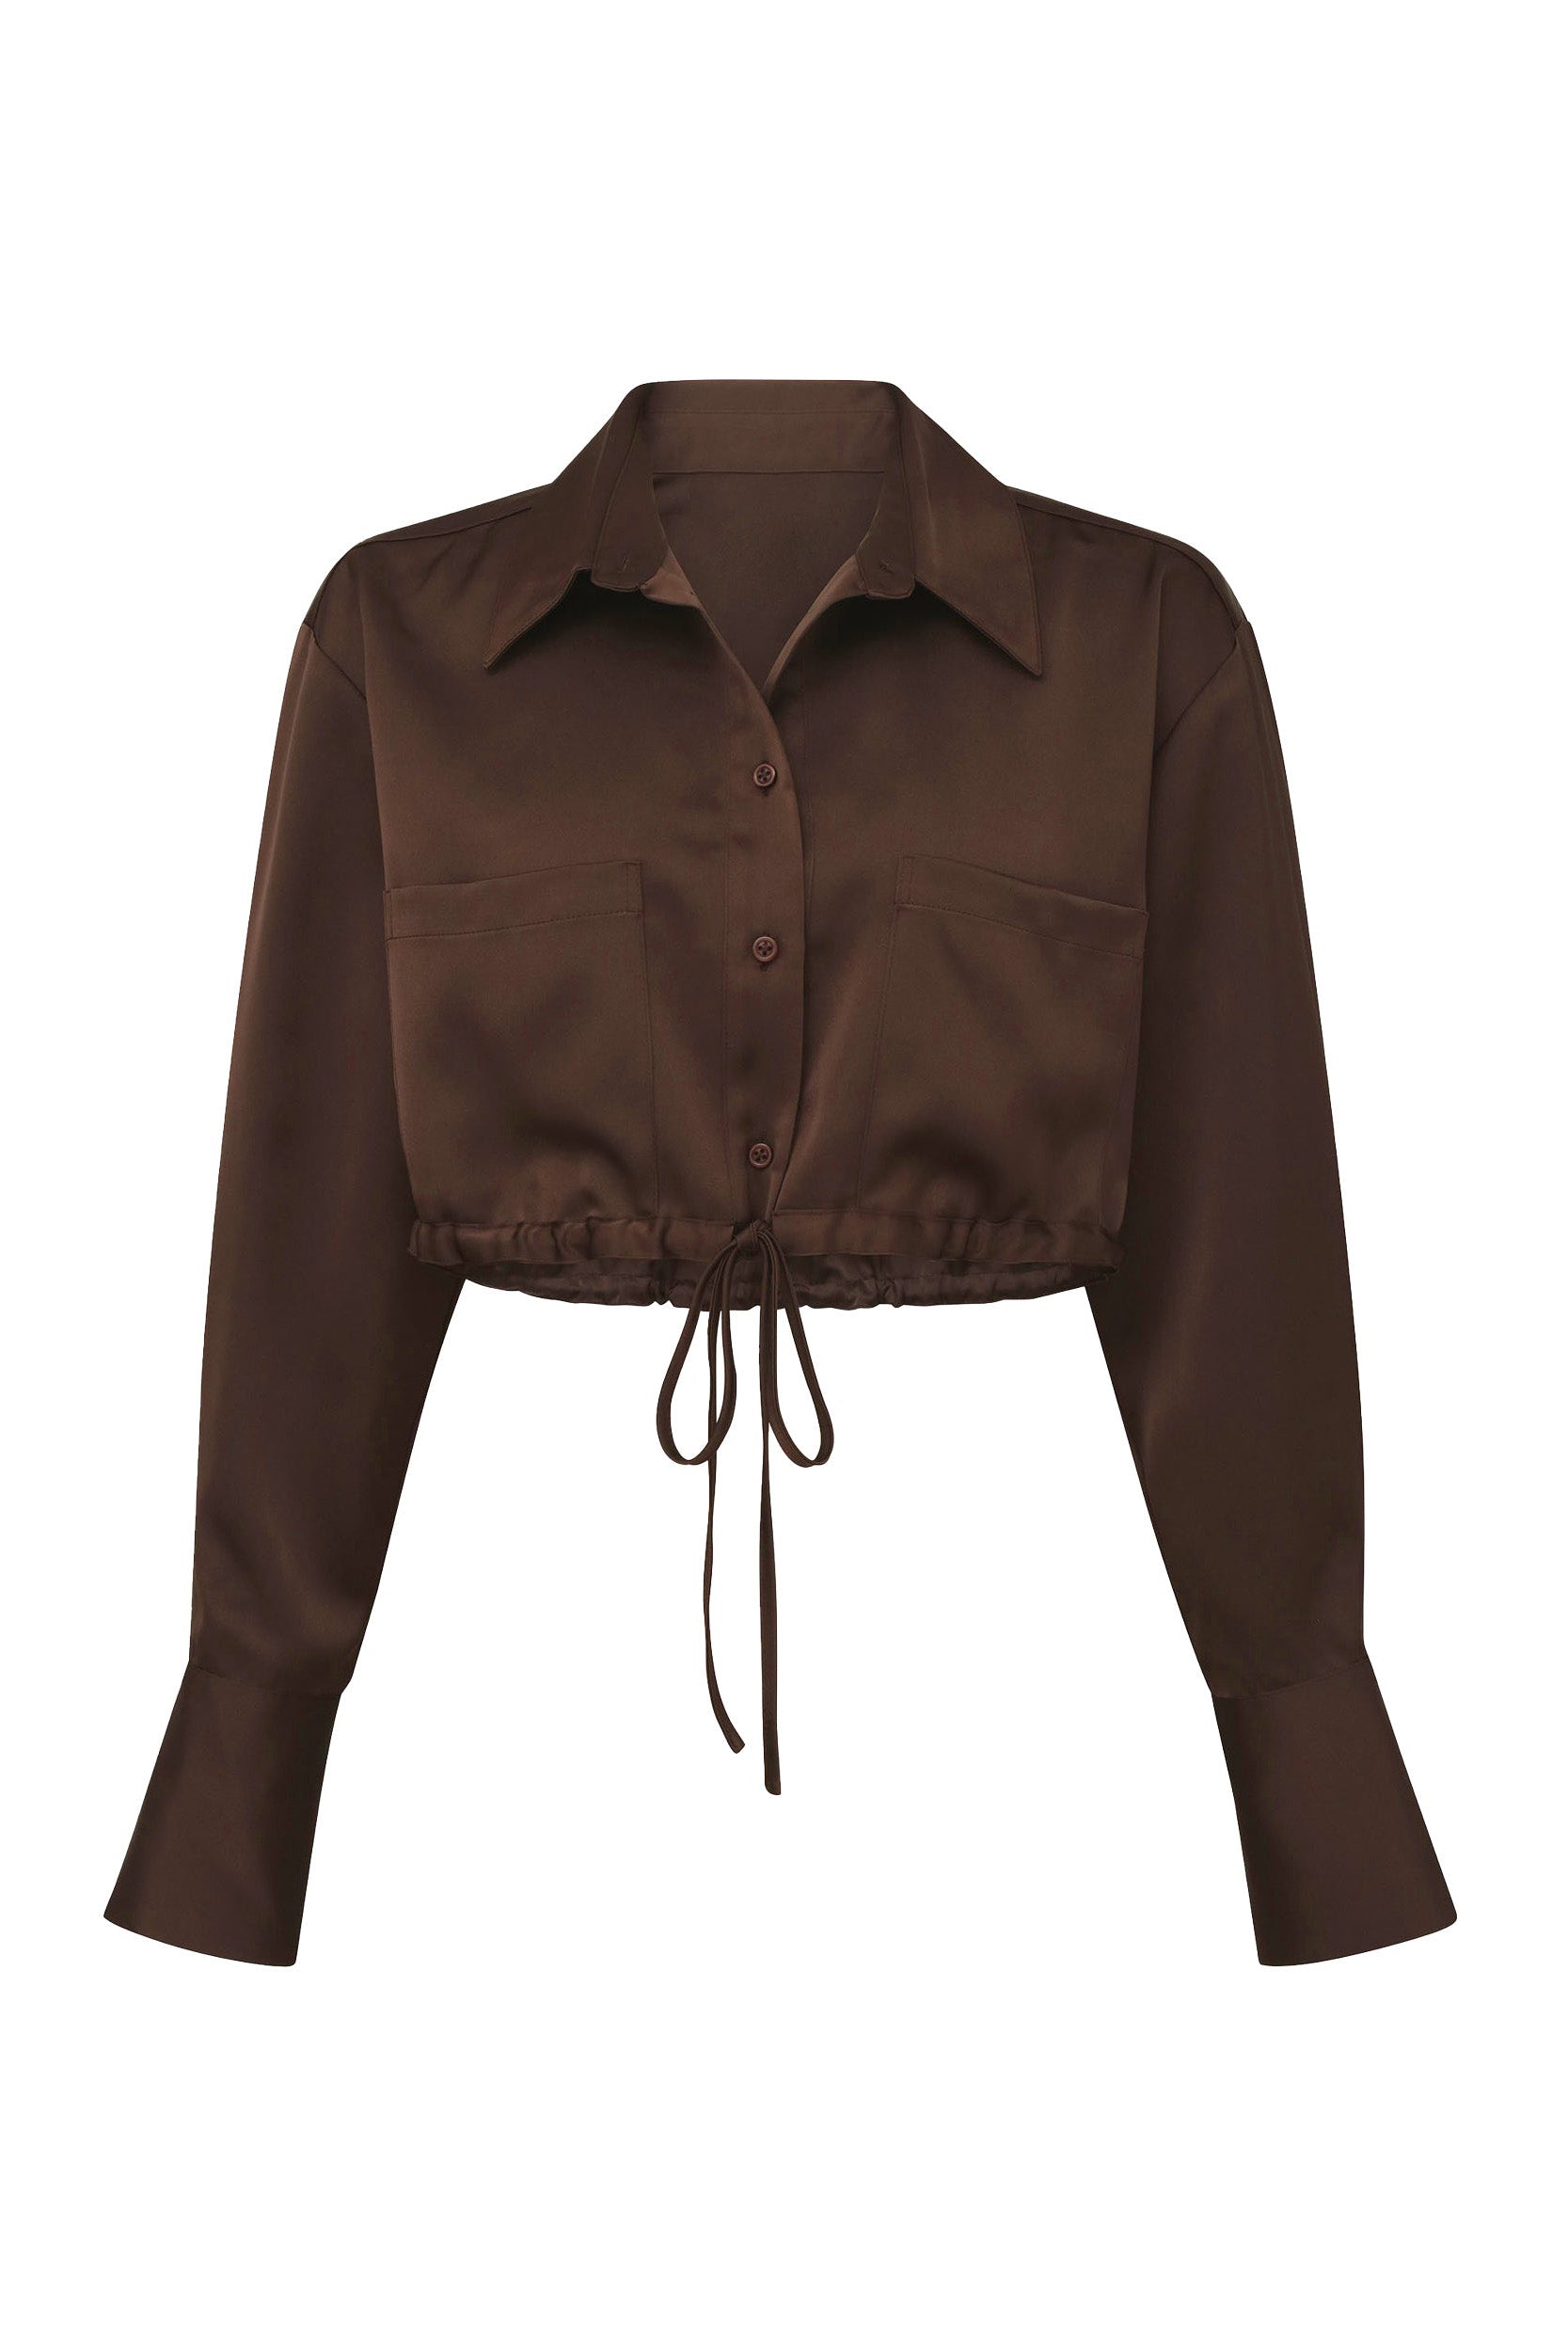 The Milan Satin Button Up - Espresso is a dark brown crop top with a collared neckline and button-down front. This shirt features two cargo-style pockets on the front, a tie-waist that creates gathered detailing, and slightly flared cuffs for a unique touch to the classic design.